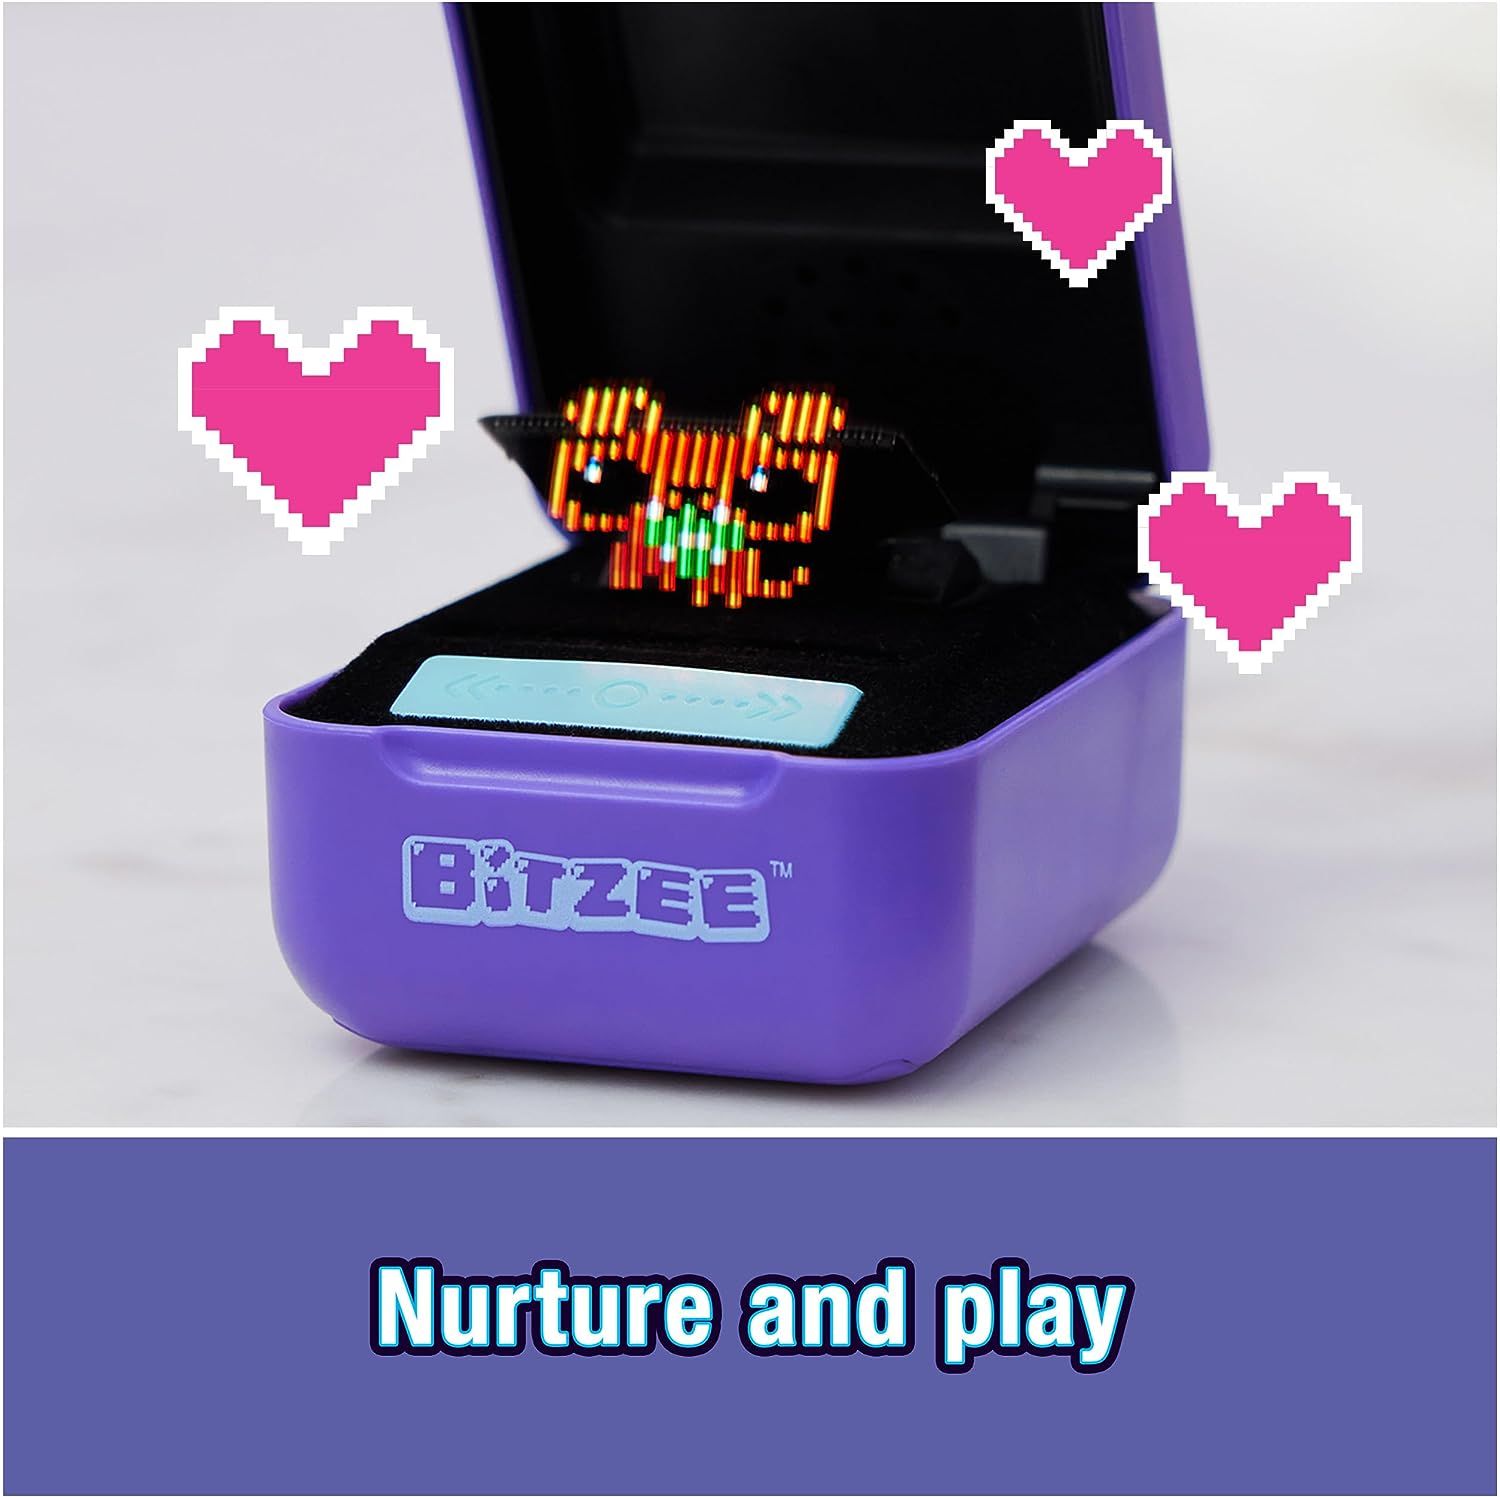 Reposted from @happydaysofandrej: 𝗠𝗲𝗲𝘁 𝗺𝘆 𝗡𝗲𝘄 𝗣𝗲𝘁! ฅ՞•ﻌ•՞ฅ ✨  BITZEE ✨ Amazing Pets Digital Toy that you can really touch! Watch as how  my…